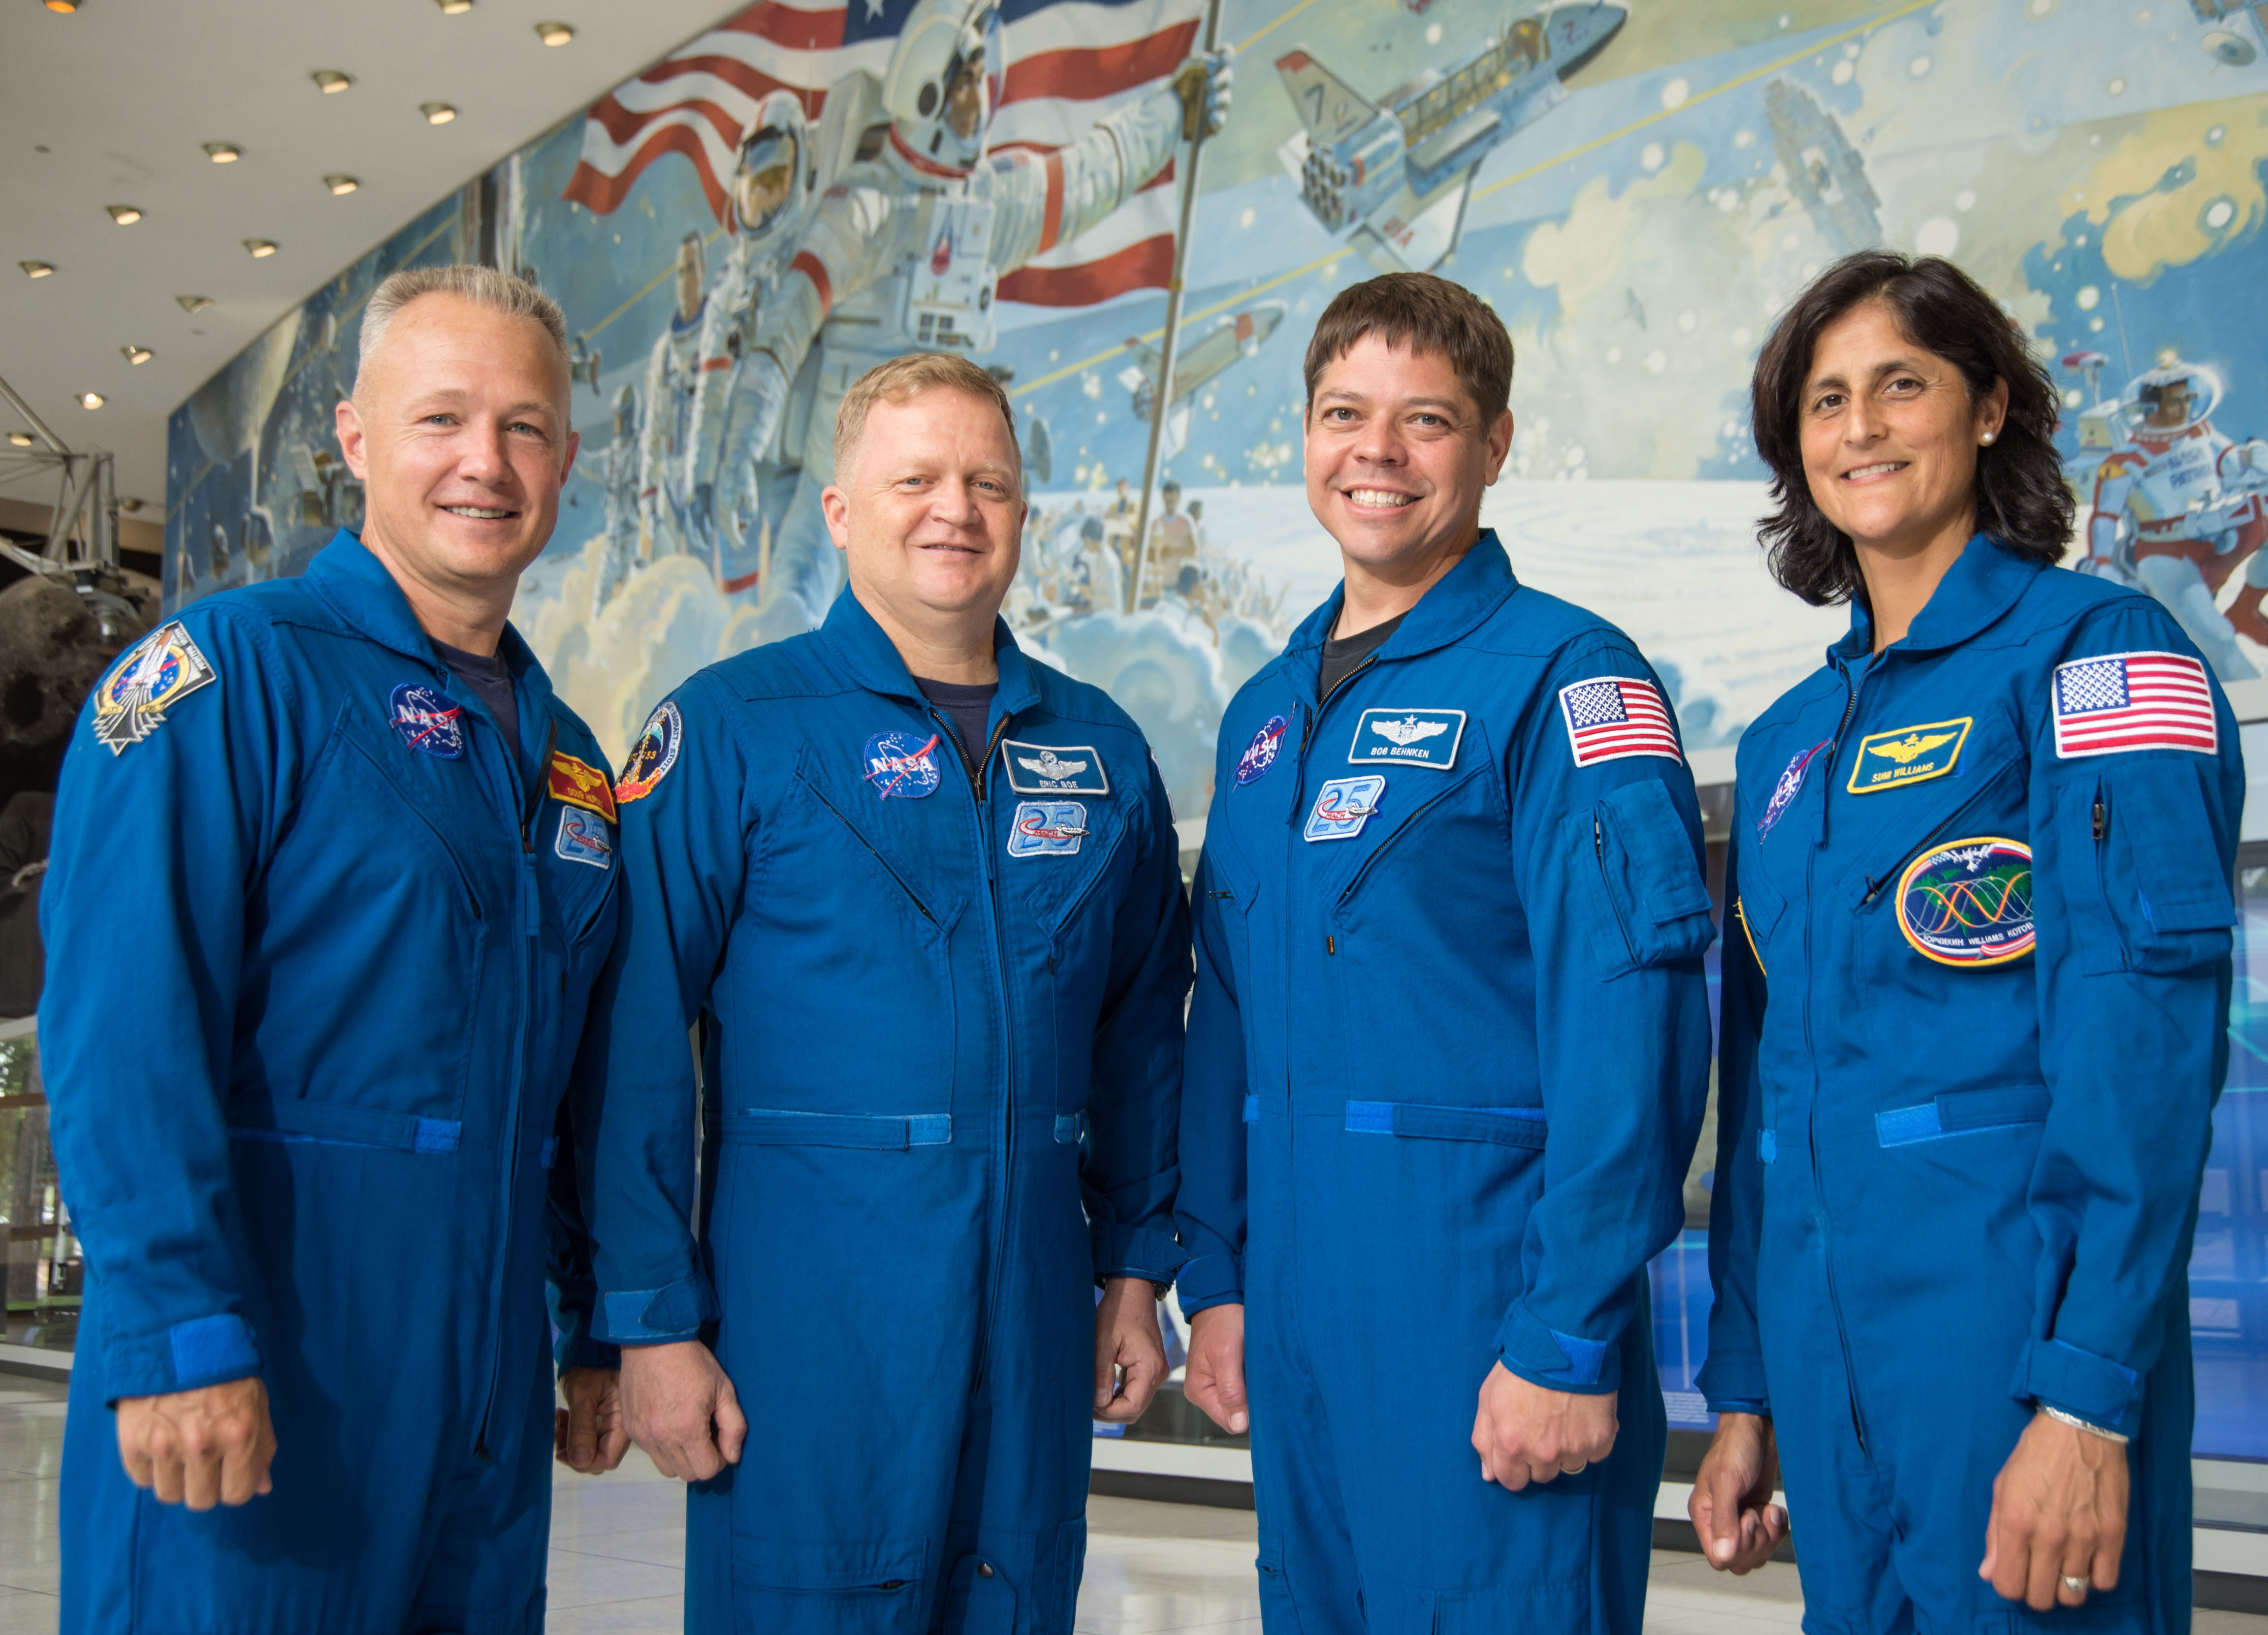 Last month, four veteran astronauts were assigned to begin training for the Commercial Crew Program. From left to right are Doug Hurley, Eric Boe, Bob Behnken and Suni Williams. Photo Credit: James Blair/NASA